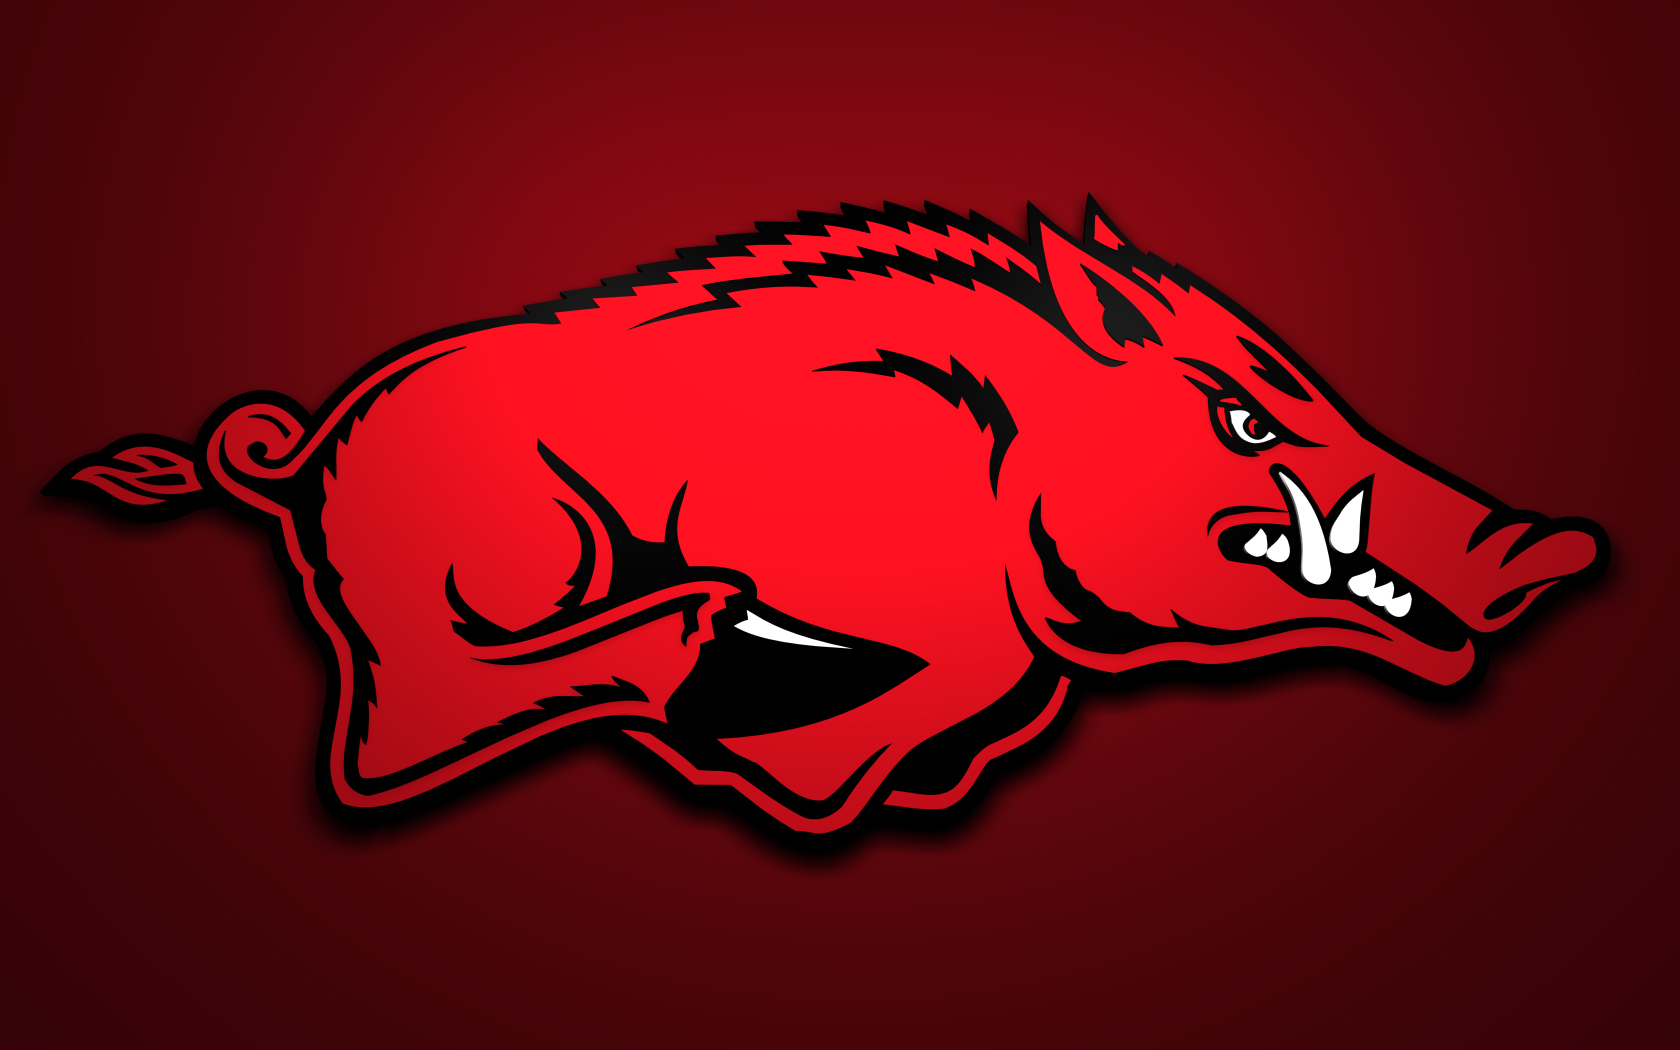 Download wallpapers Arkansas Razorbacks 4k american football team NCAA  red black stone USA asphalt texture american football Arkansas  Razorbacks logo for desktop with resolution 3840x2400 High Quality HD  pictures wallpapers